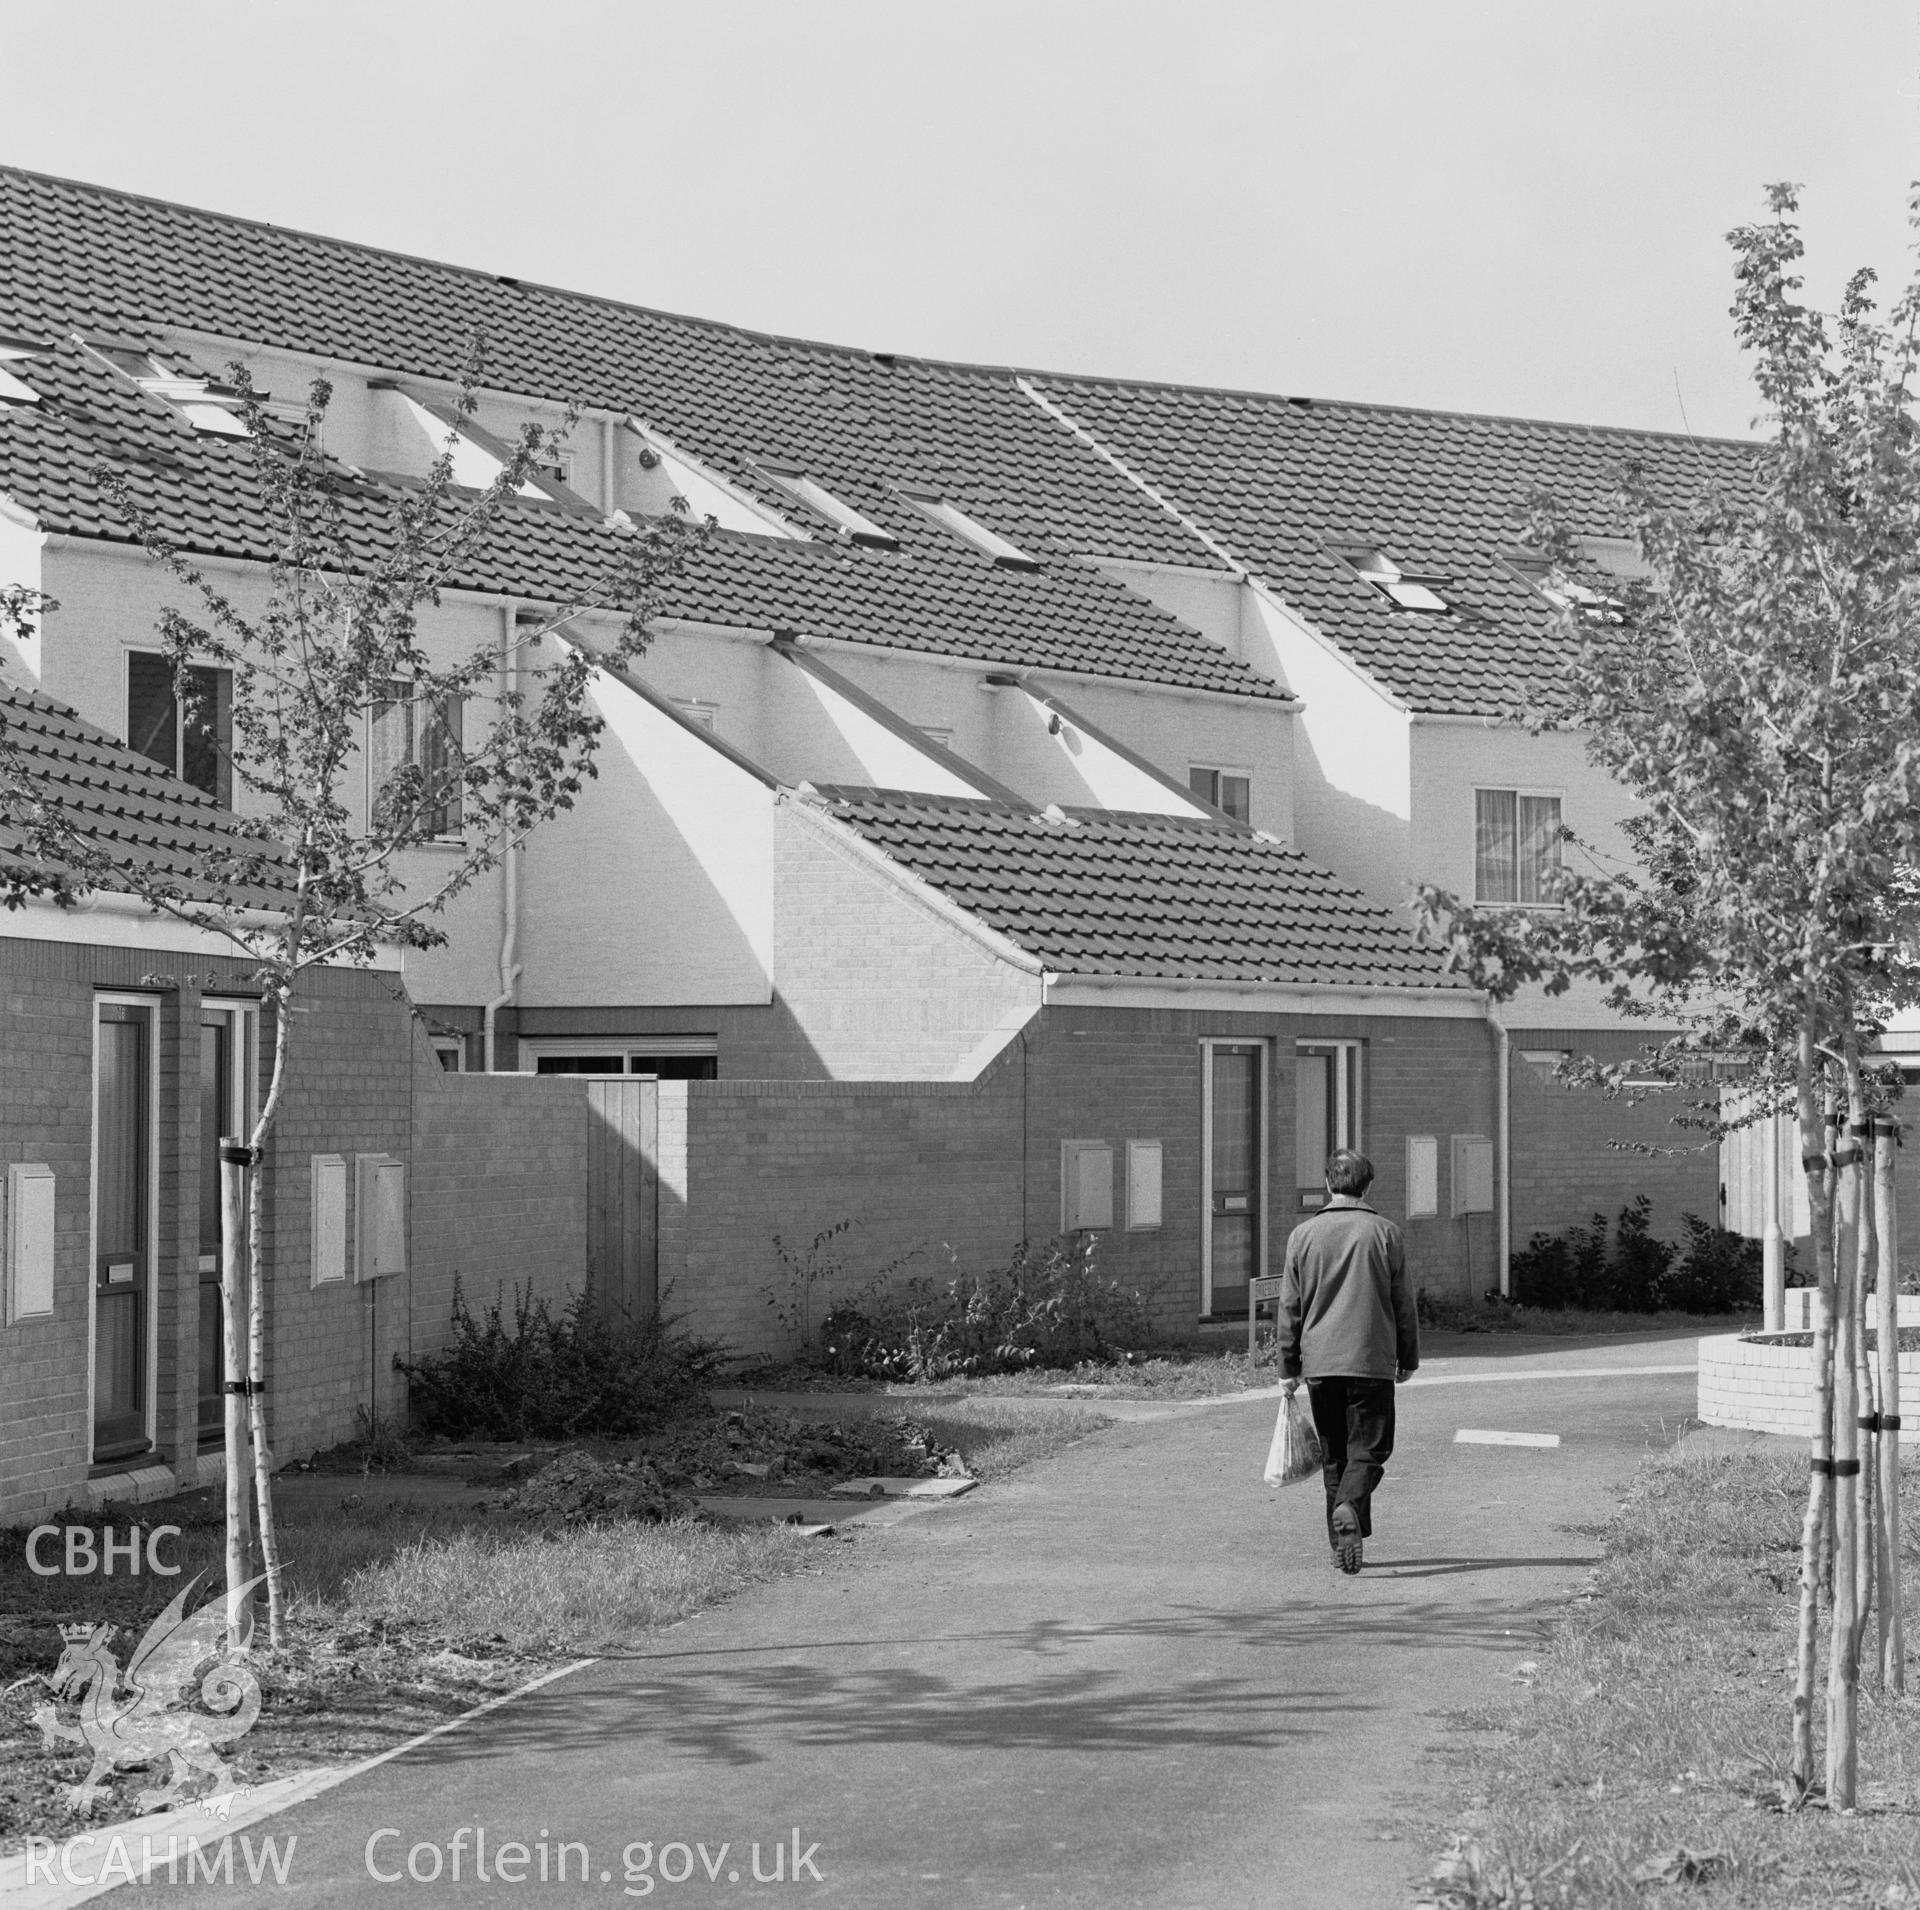 1 photographic negative showing new housing on Shaftesbury Street, Newport; collated by the former Central Office of Information.